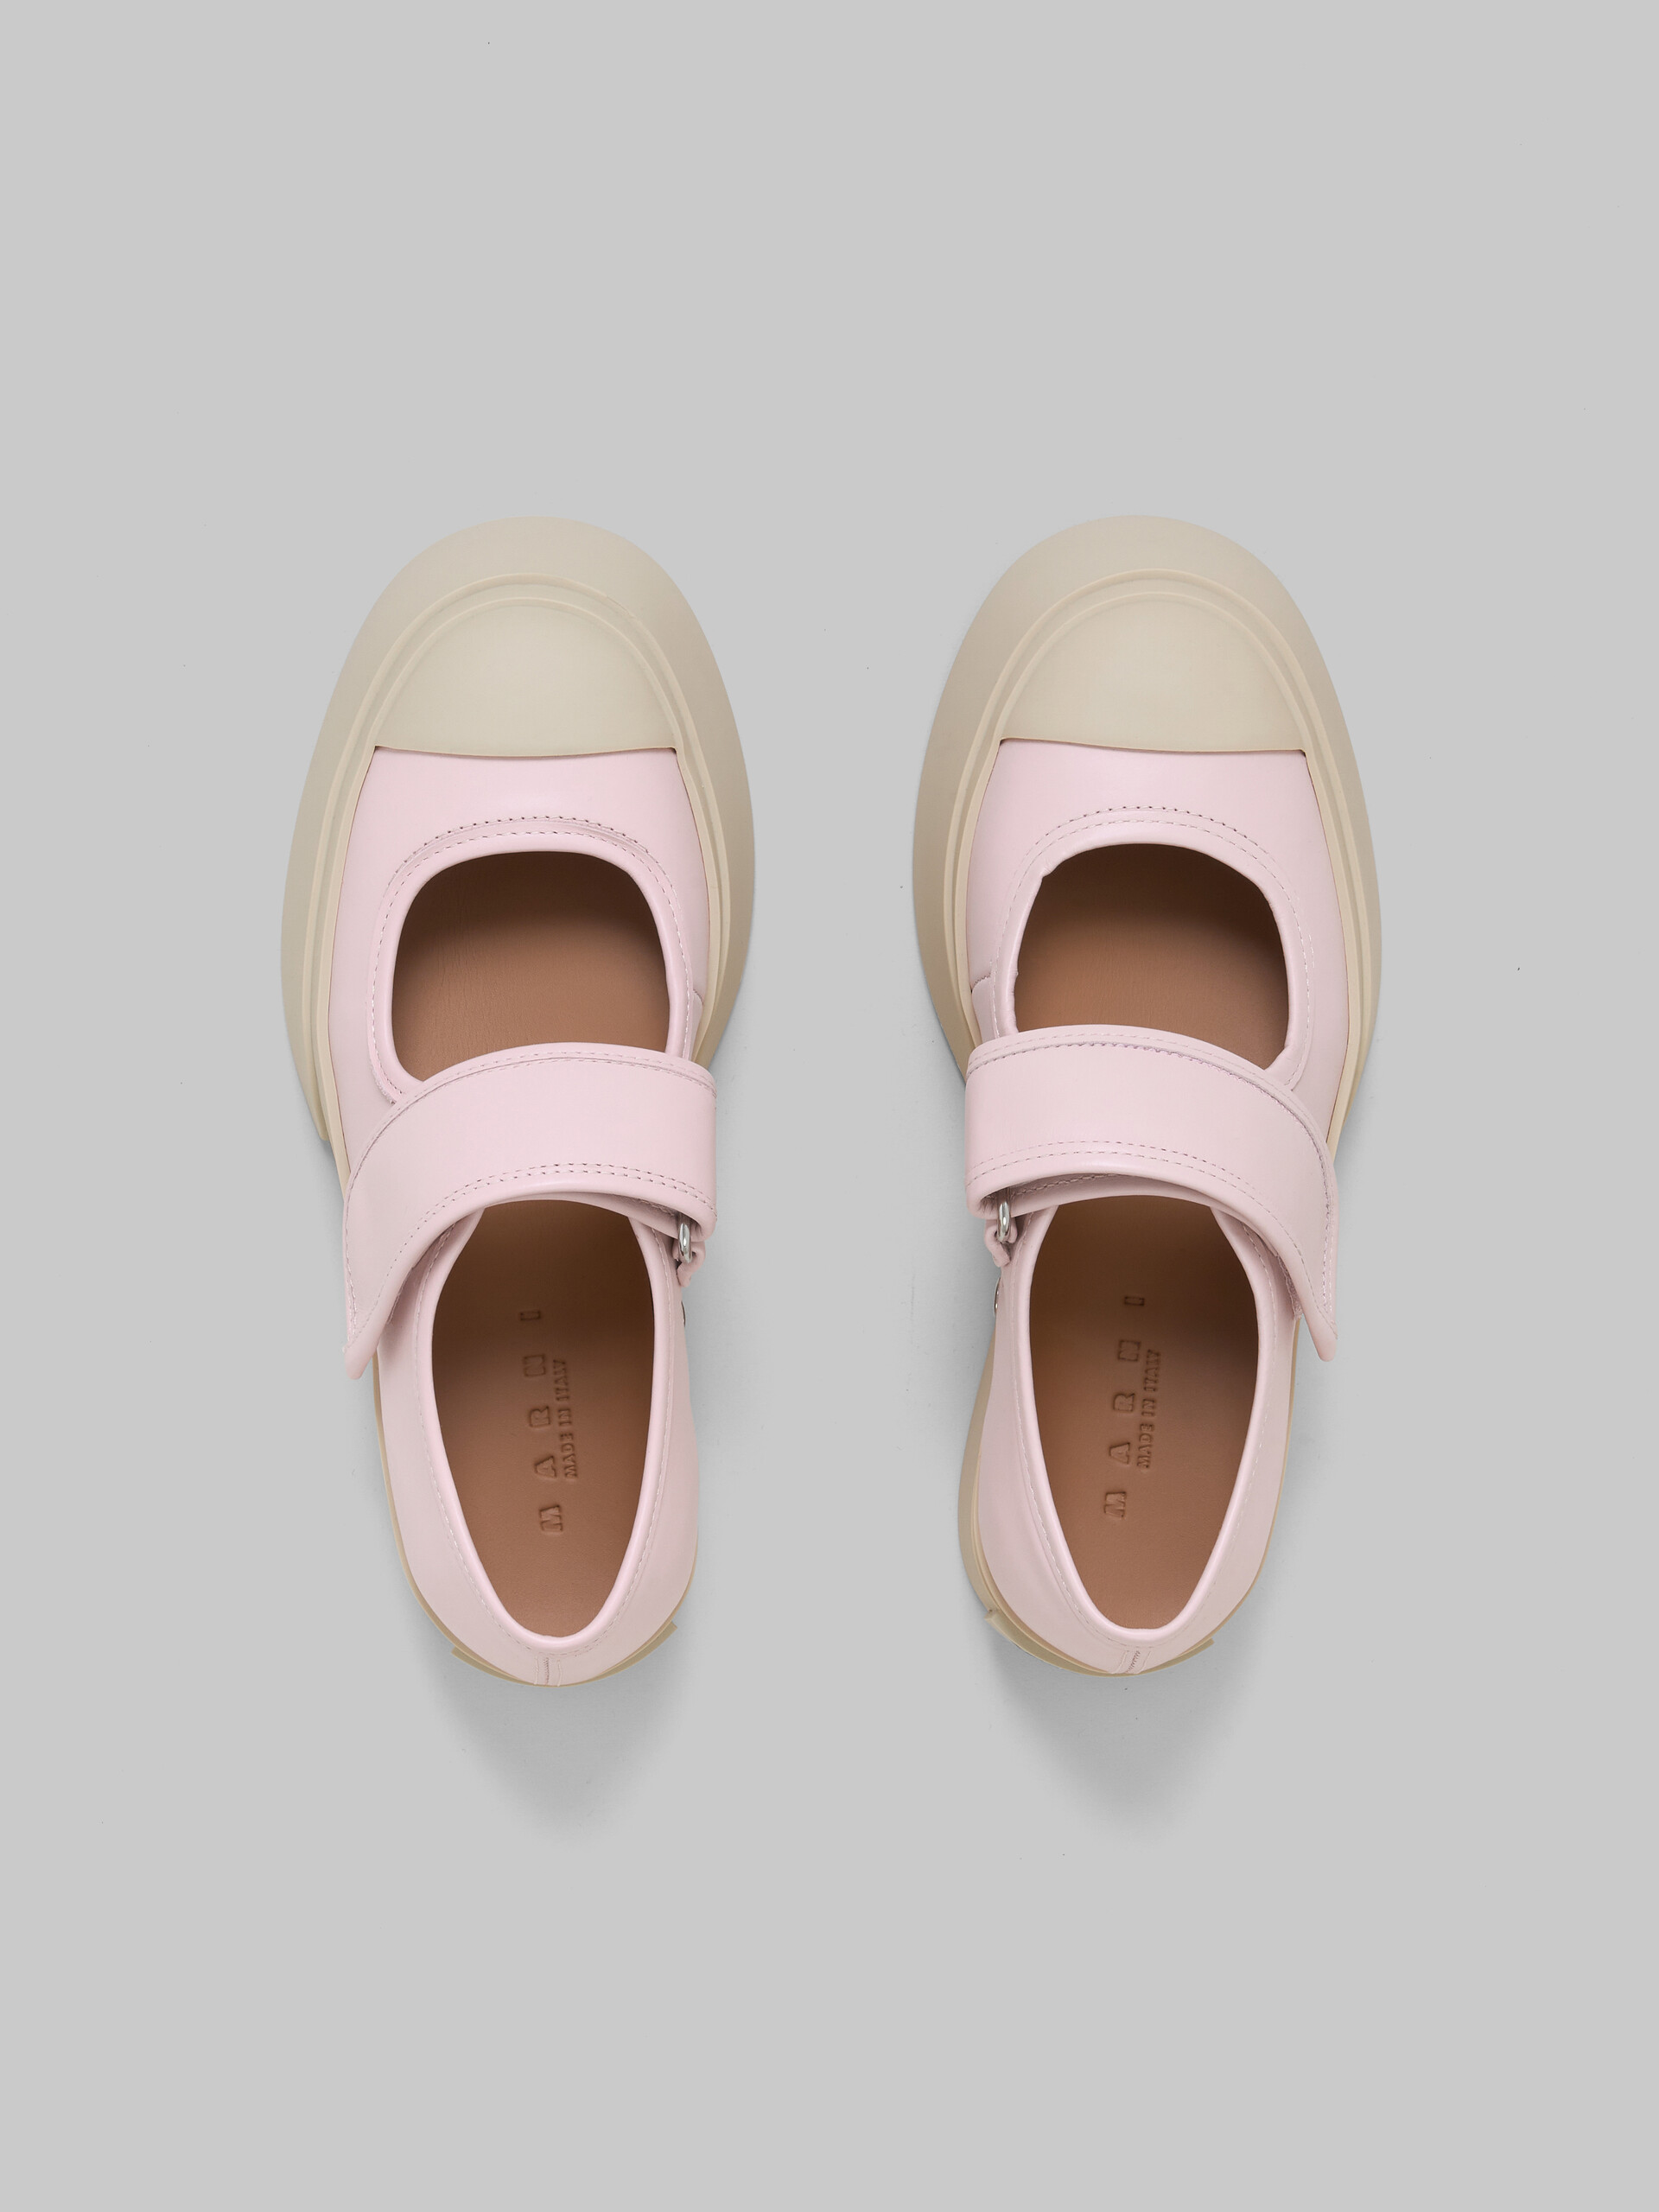 Light pink nappa leather Mary Jane sneaker - Sneakers - Image 4